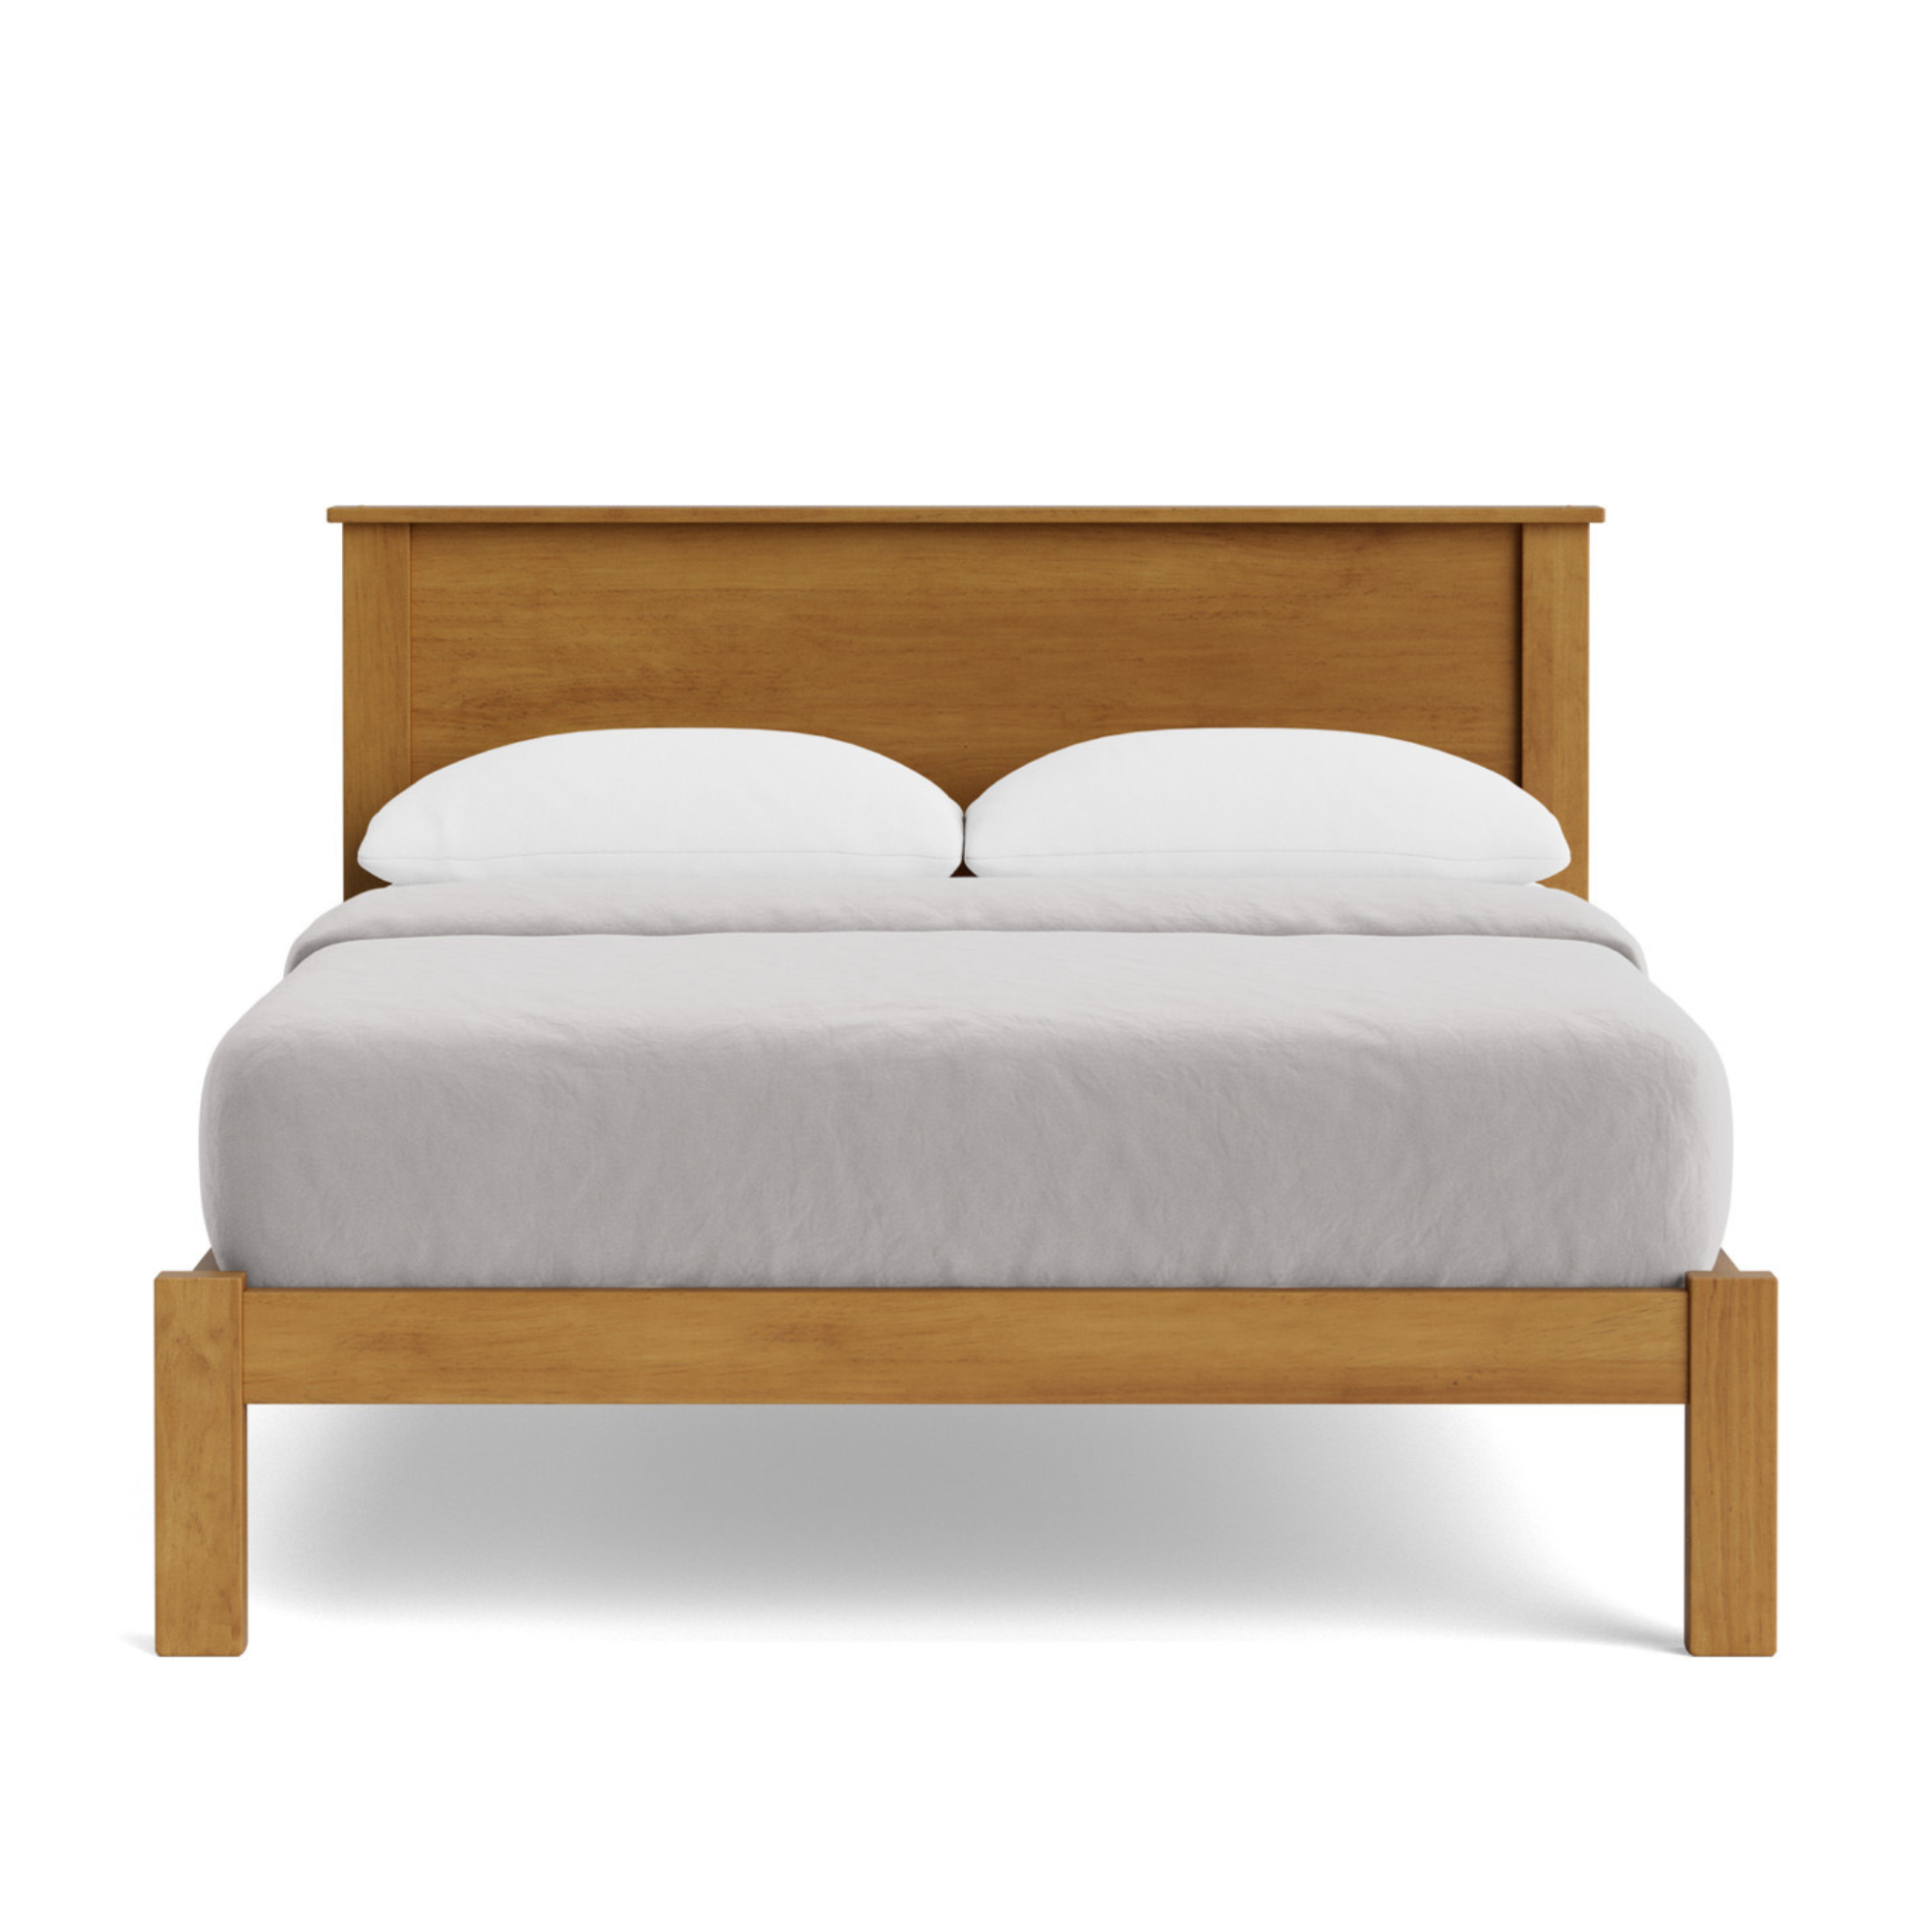 IVYDALE LOW FOOT SLAT BED | PINE OR AMERICAN ASH | ALL SIZES |NZ MADE